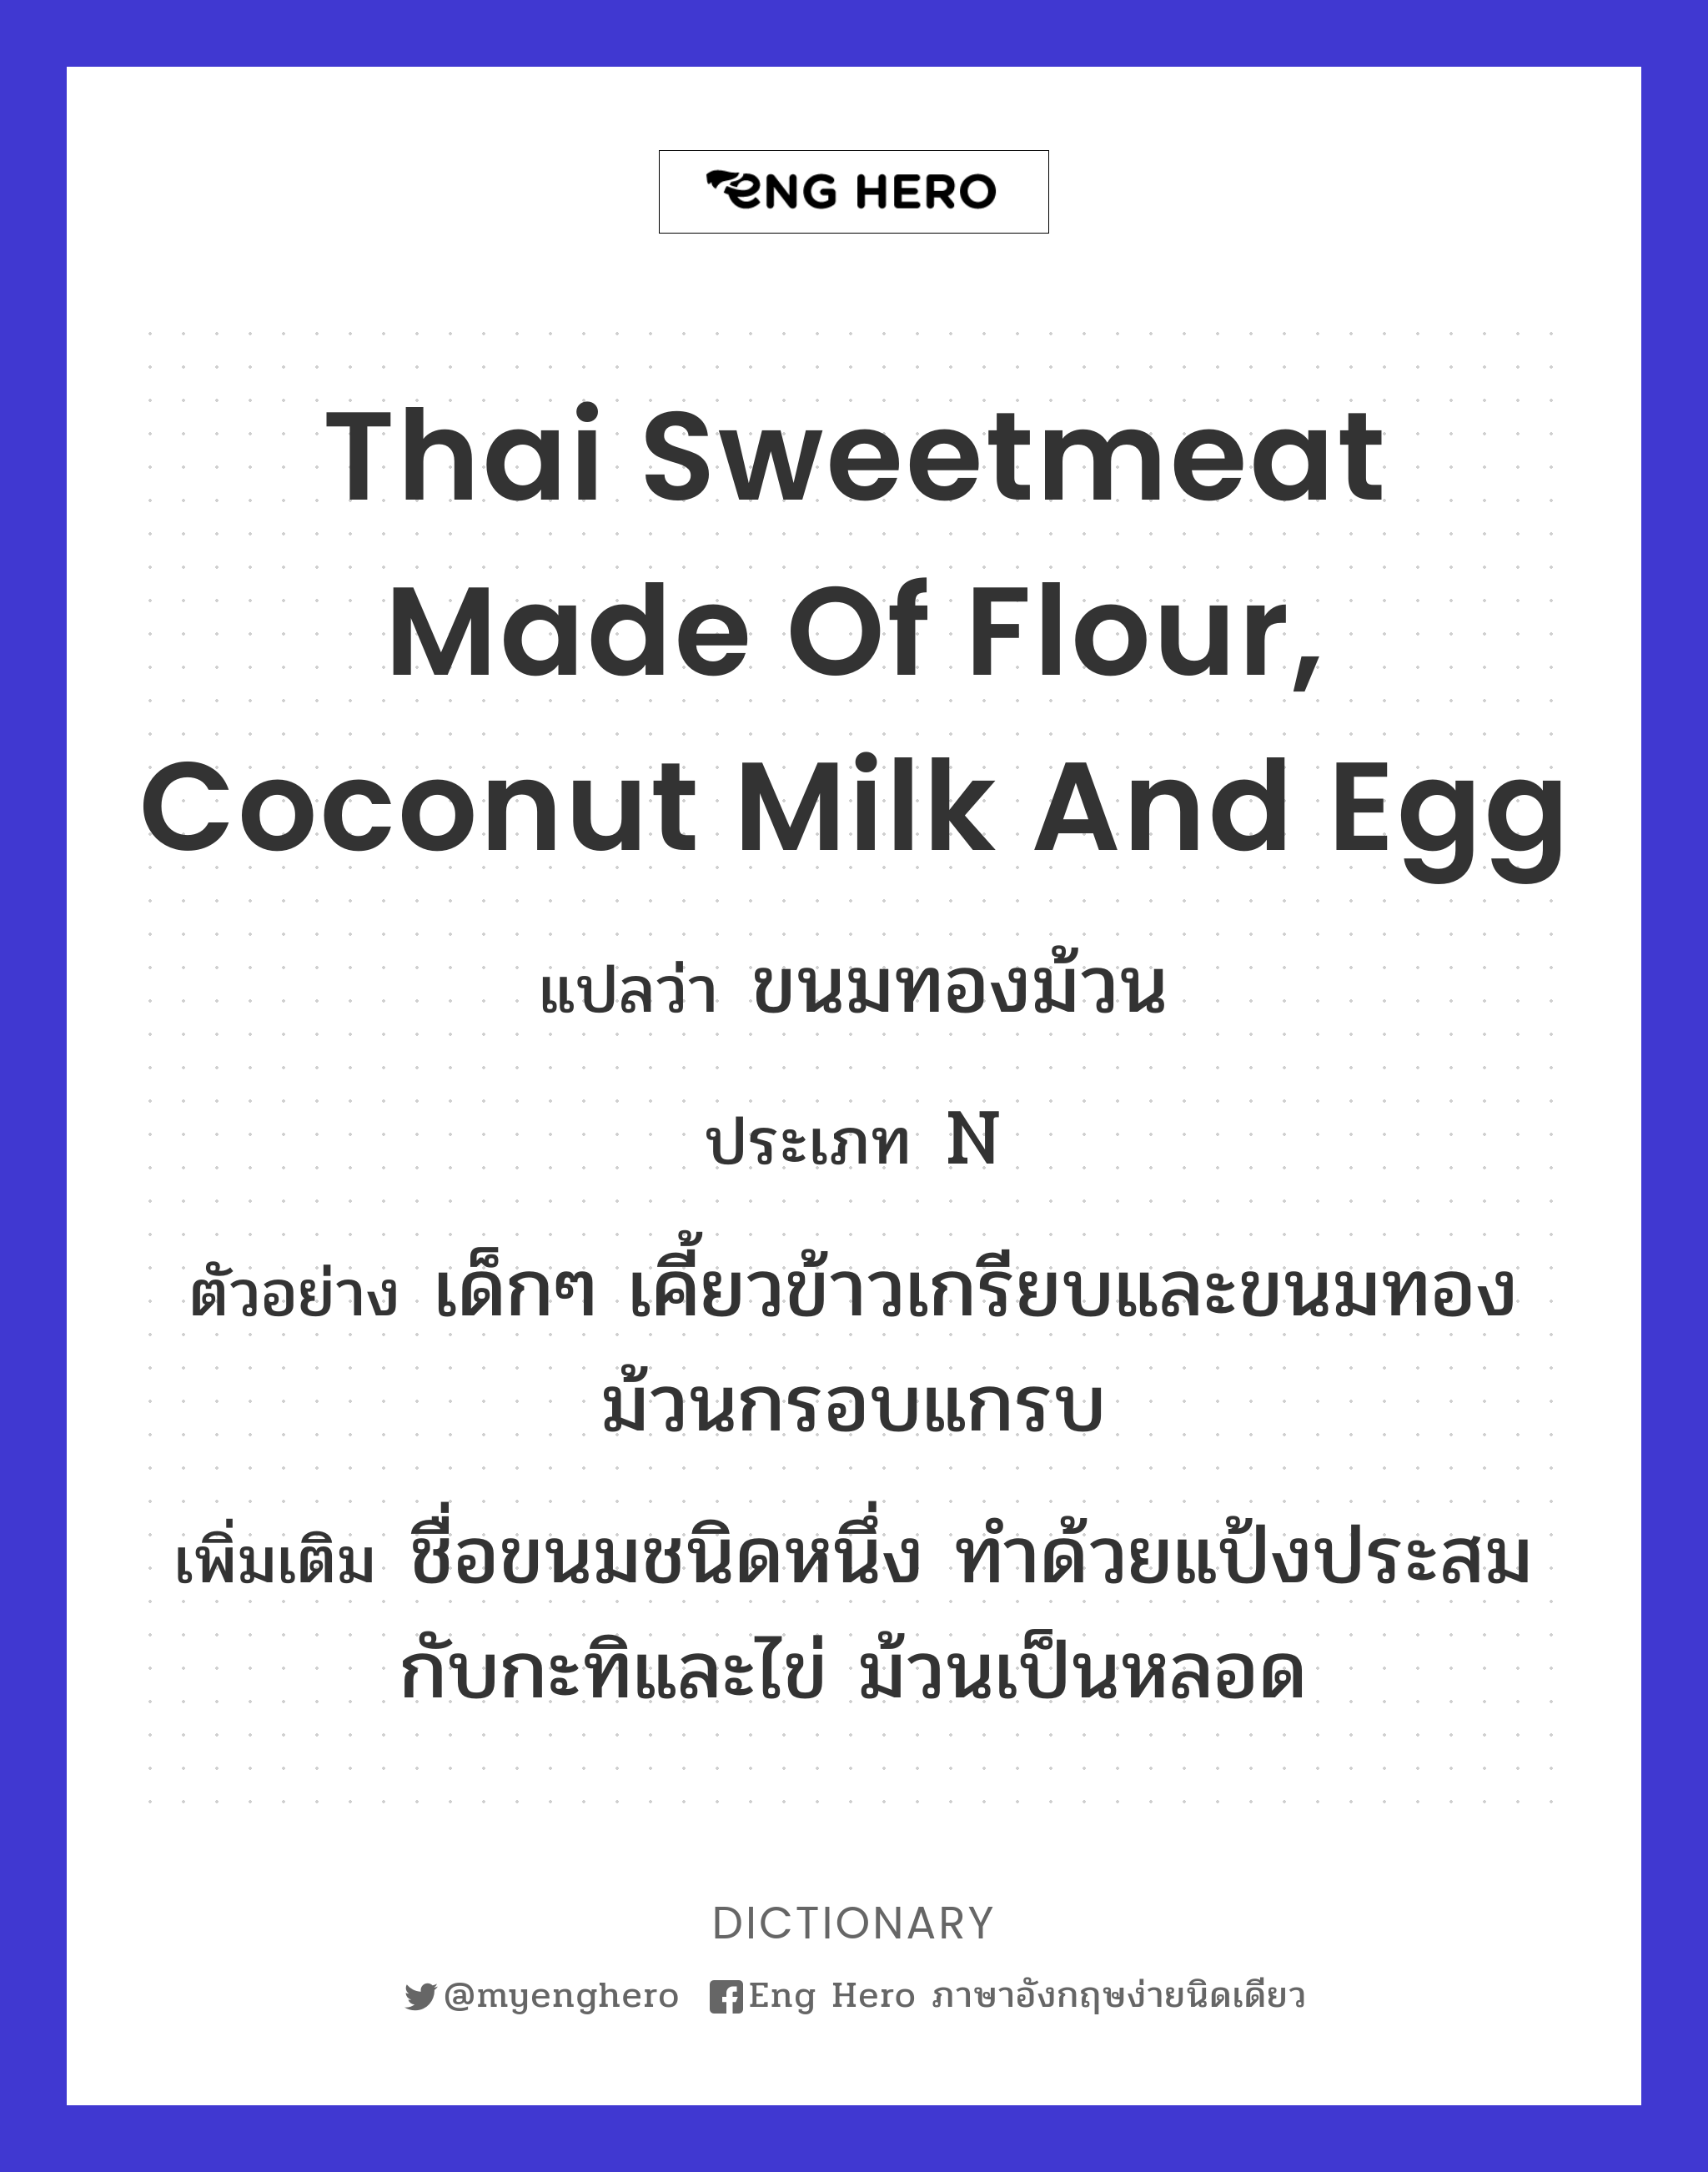 Thai sweetmeat made of flour, coconut milk and egg